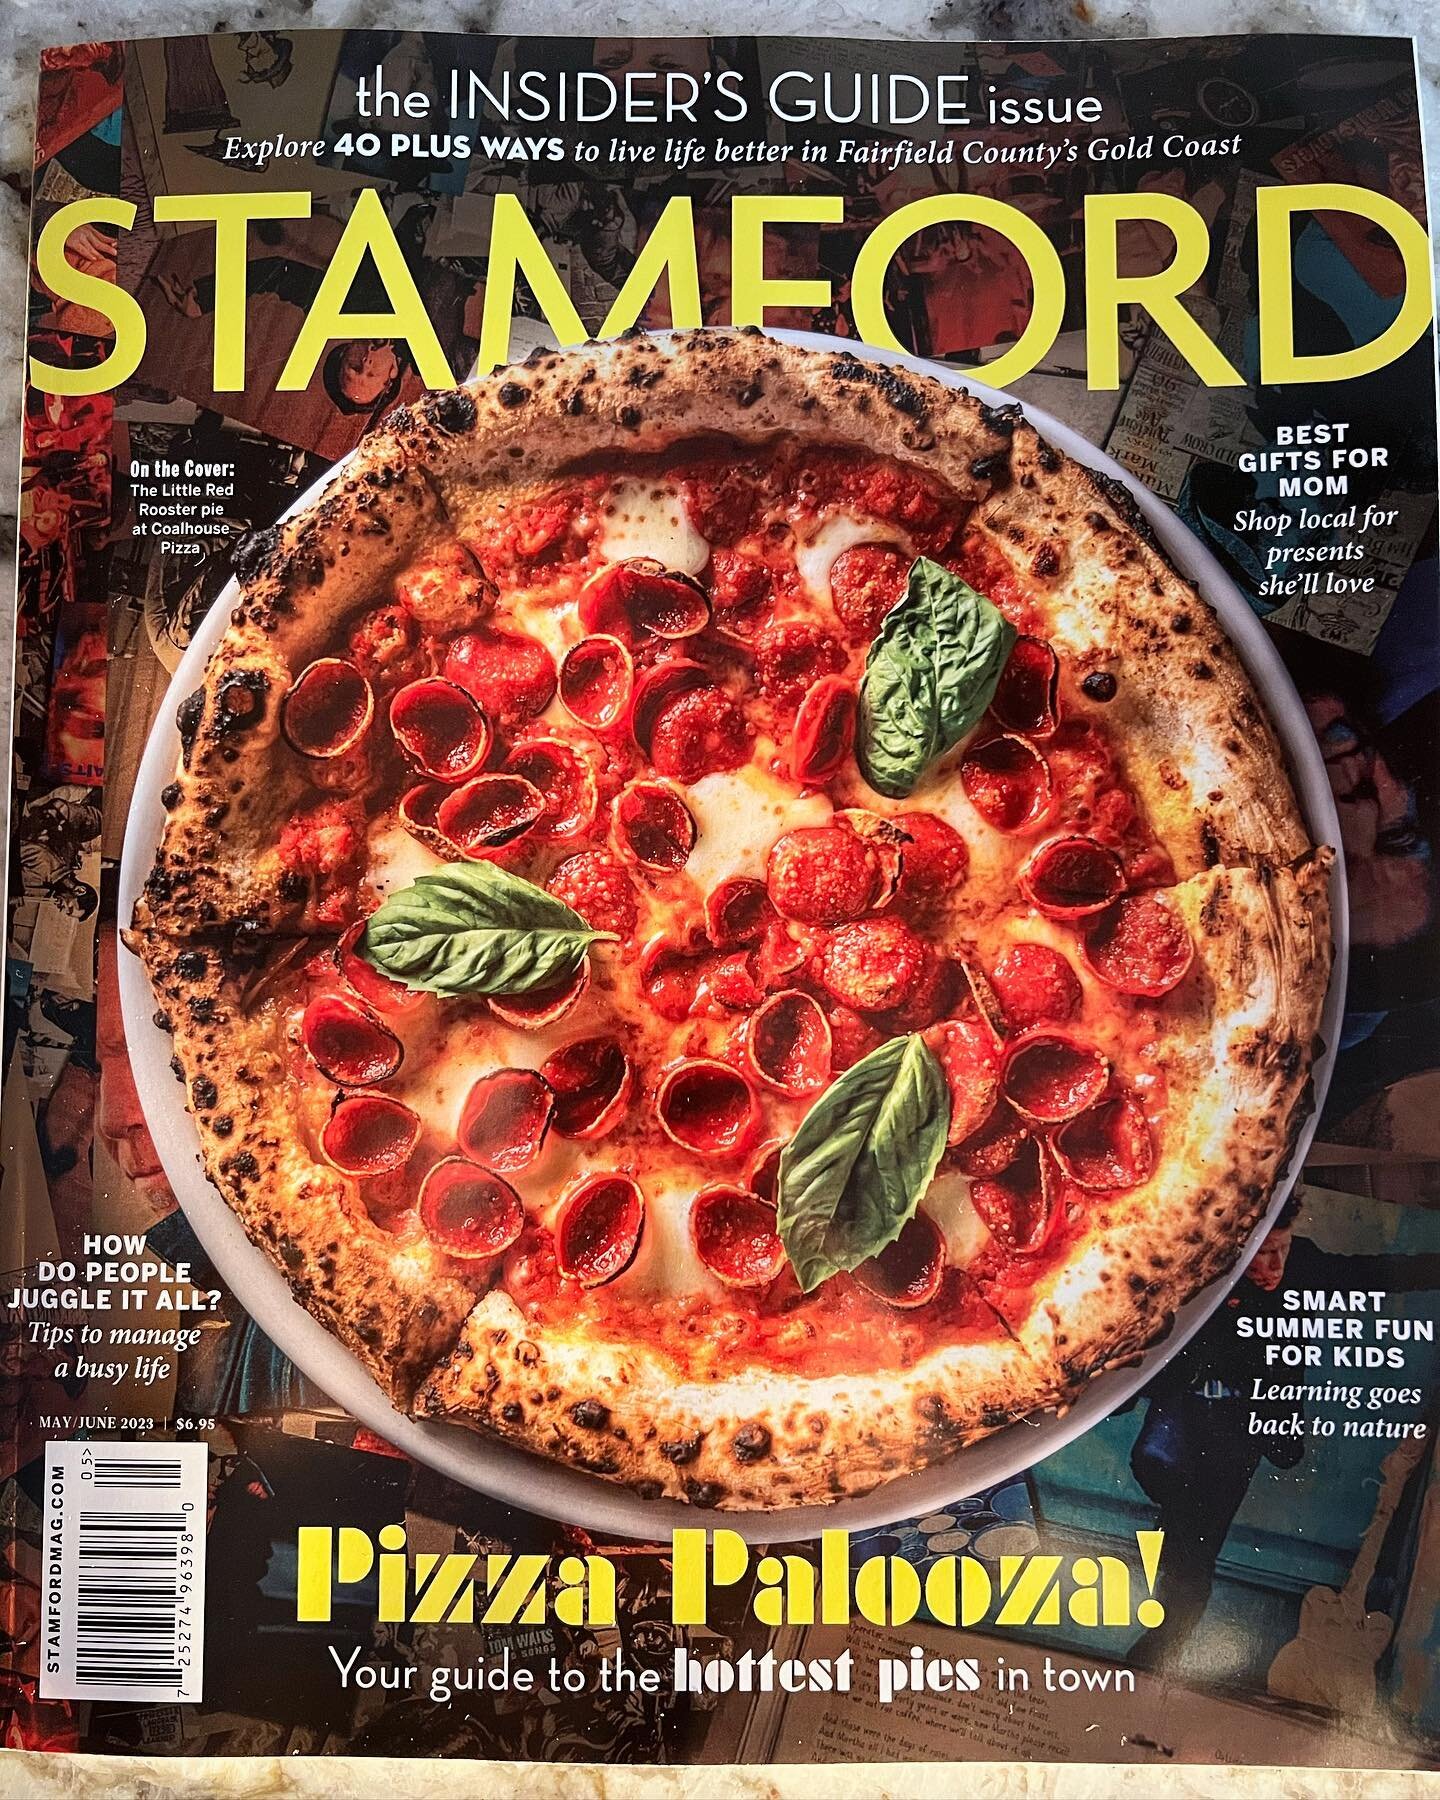 🍕🗞️ Thank you @stamfordmag , for featuring Coalhouse on the cover and in 'The Pizza Lovers Guide' section! We are thrilled that our 'Littler Red Rooster' pizza caught your attention and we are excited to share our passion for great pizza with the c